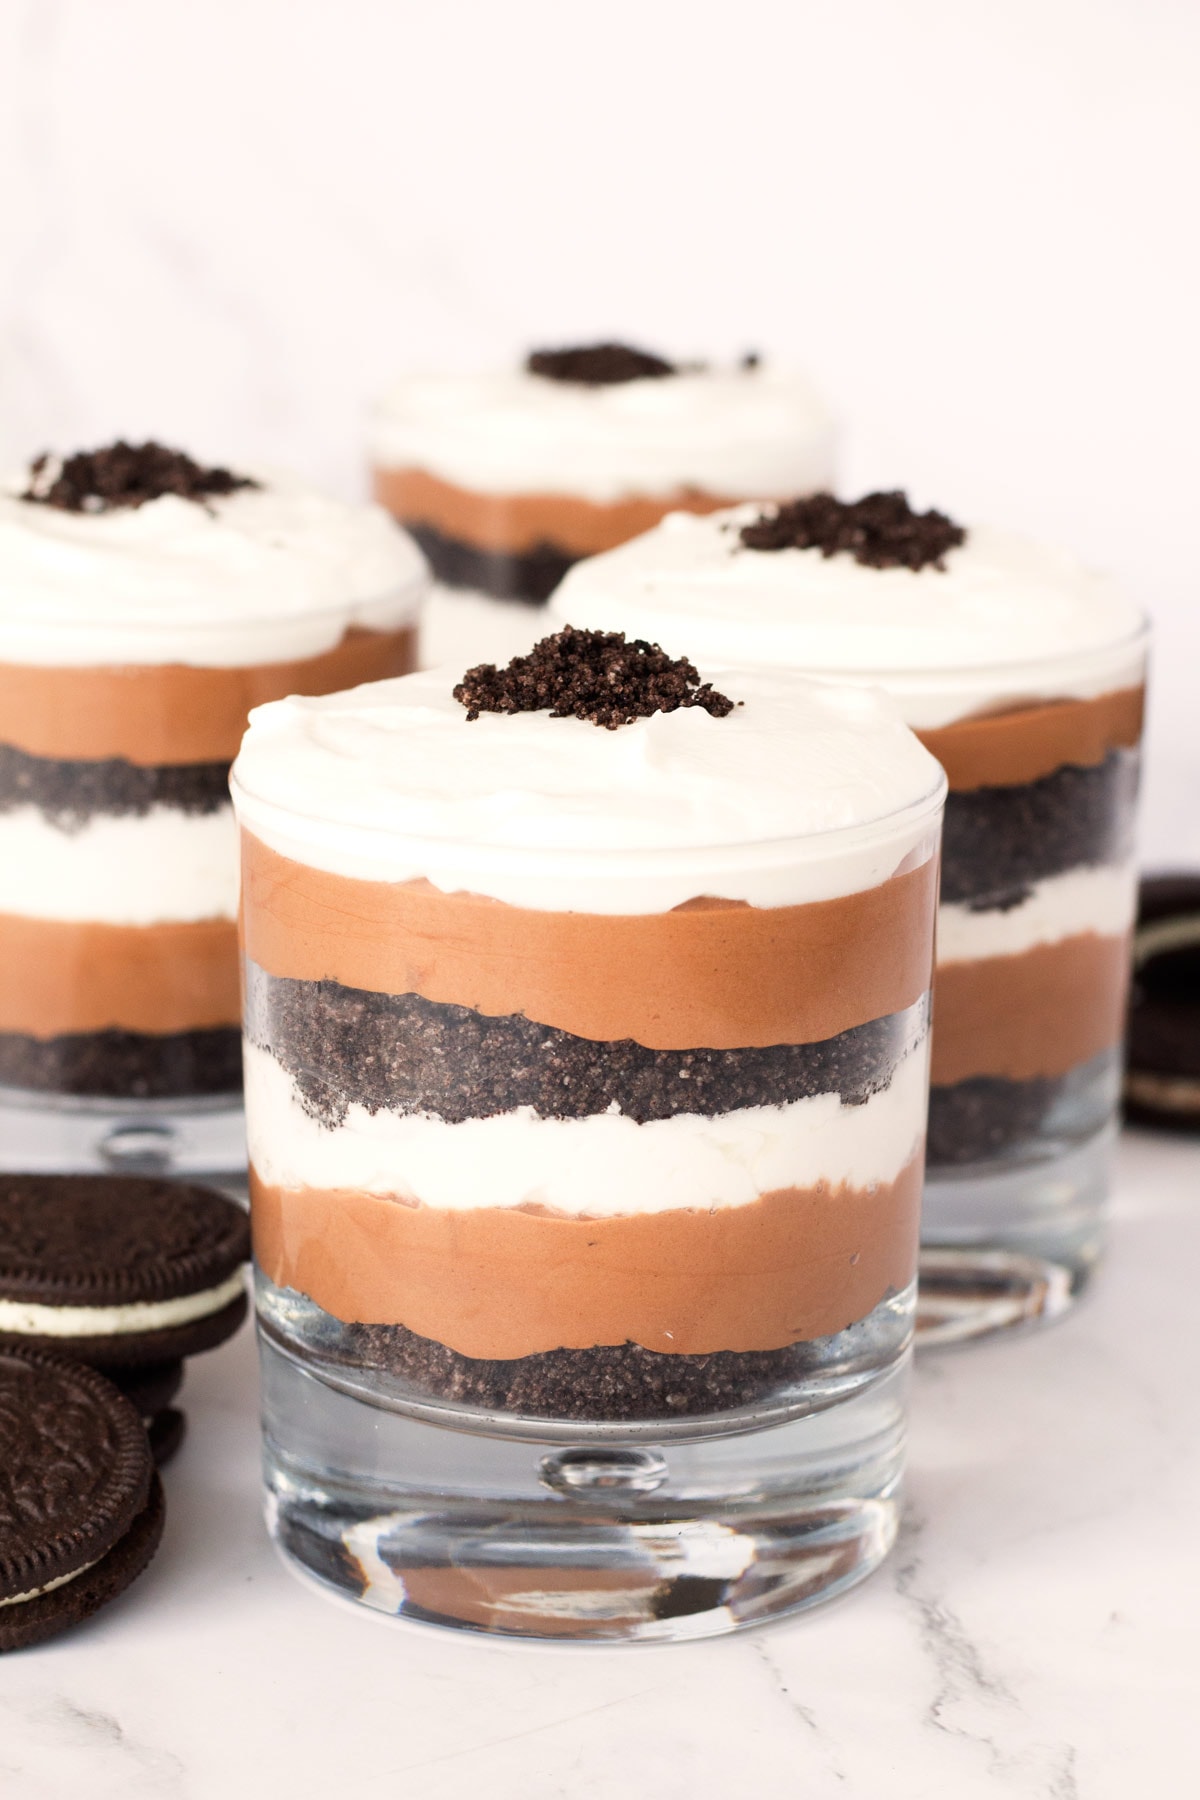 Chocolate parfait with oreo crumbs, whipped cream, and chocolate mousse.